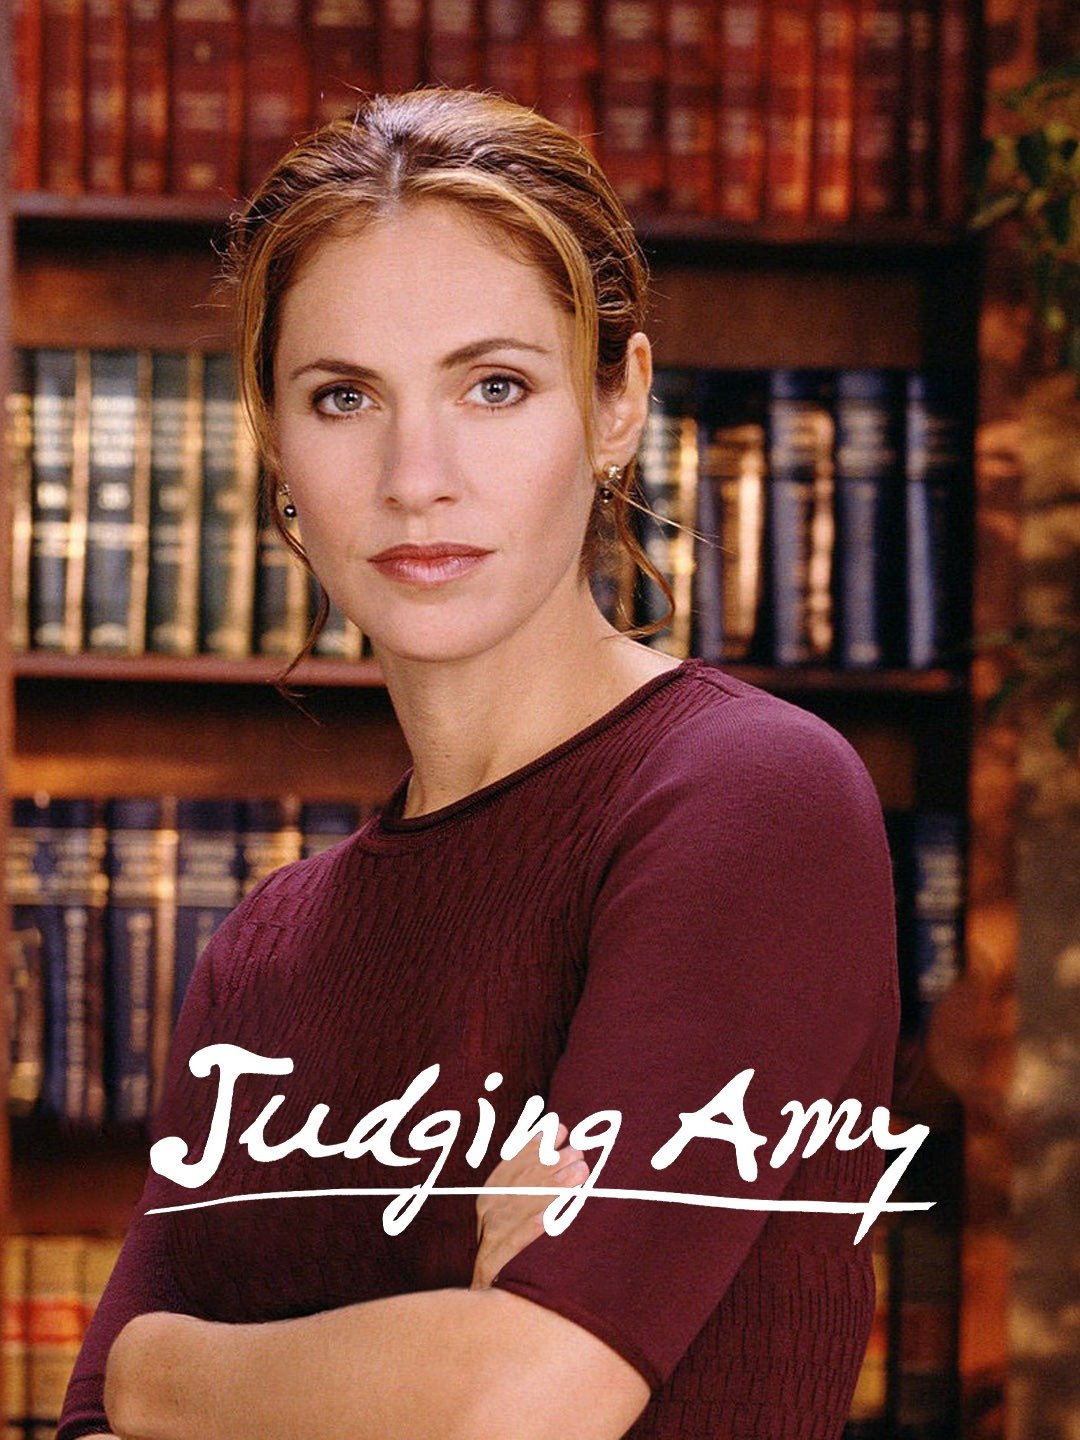 Judging Amy Wallpapers